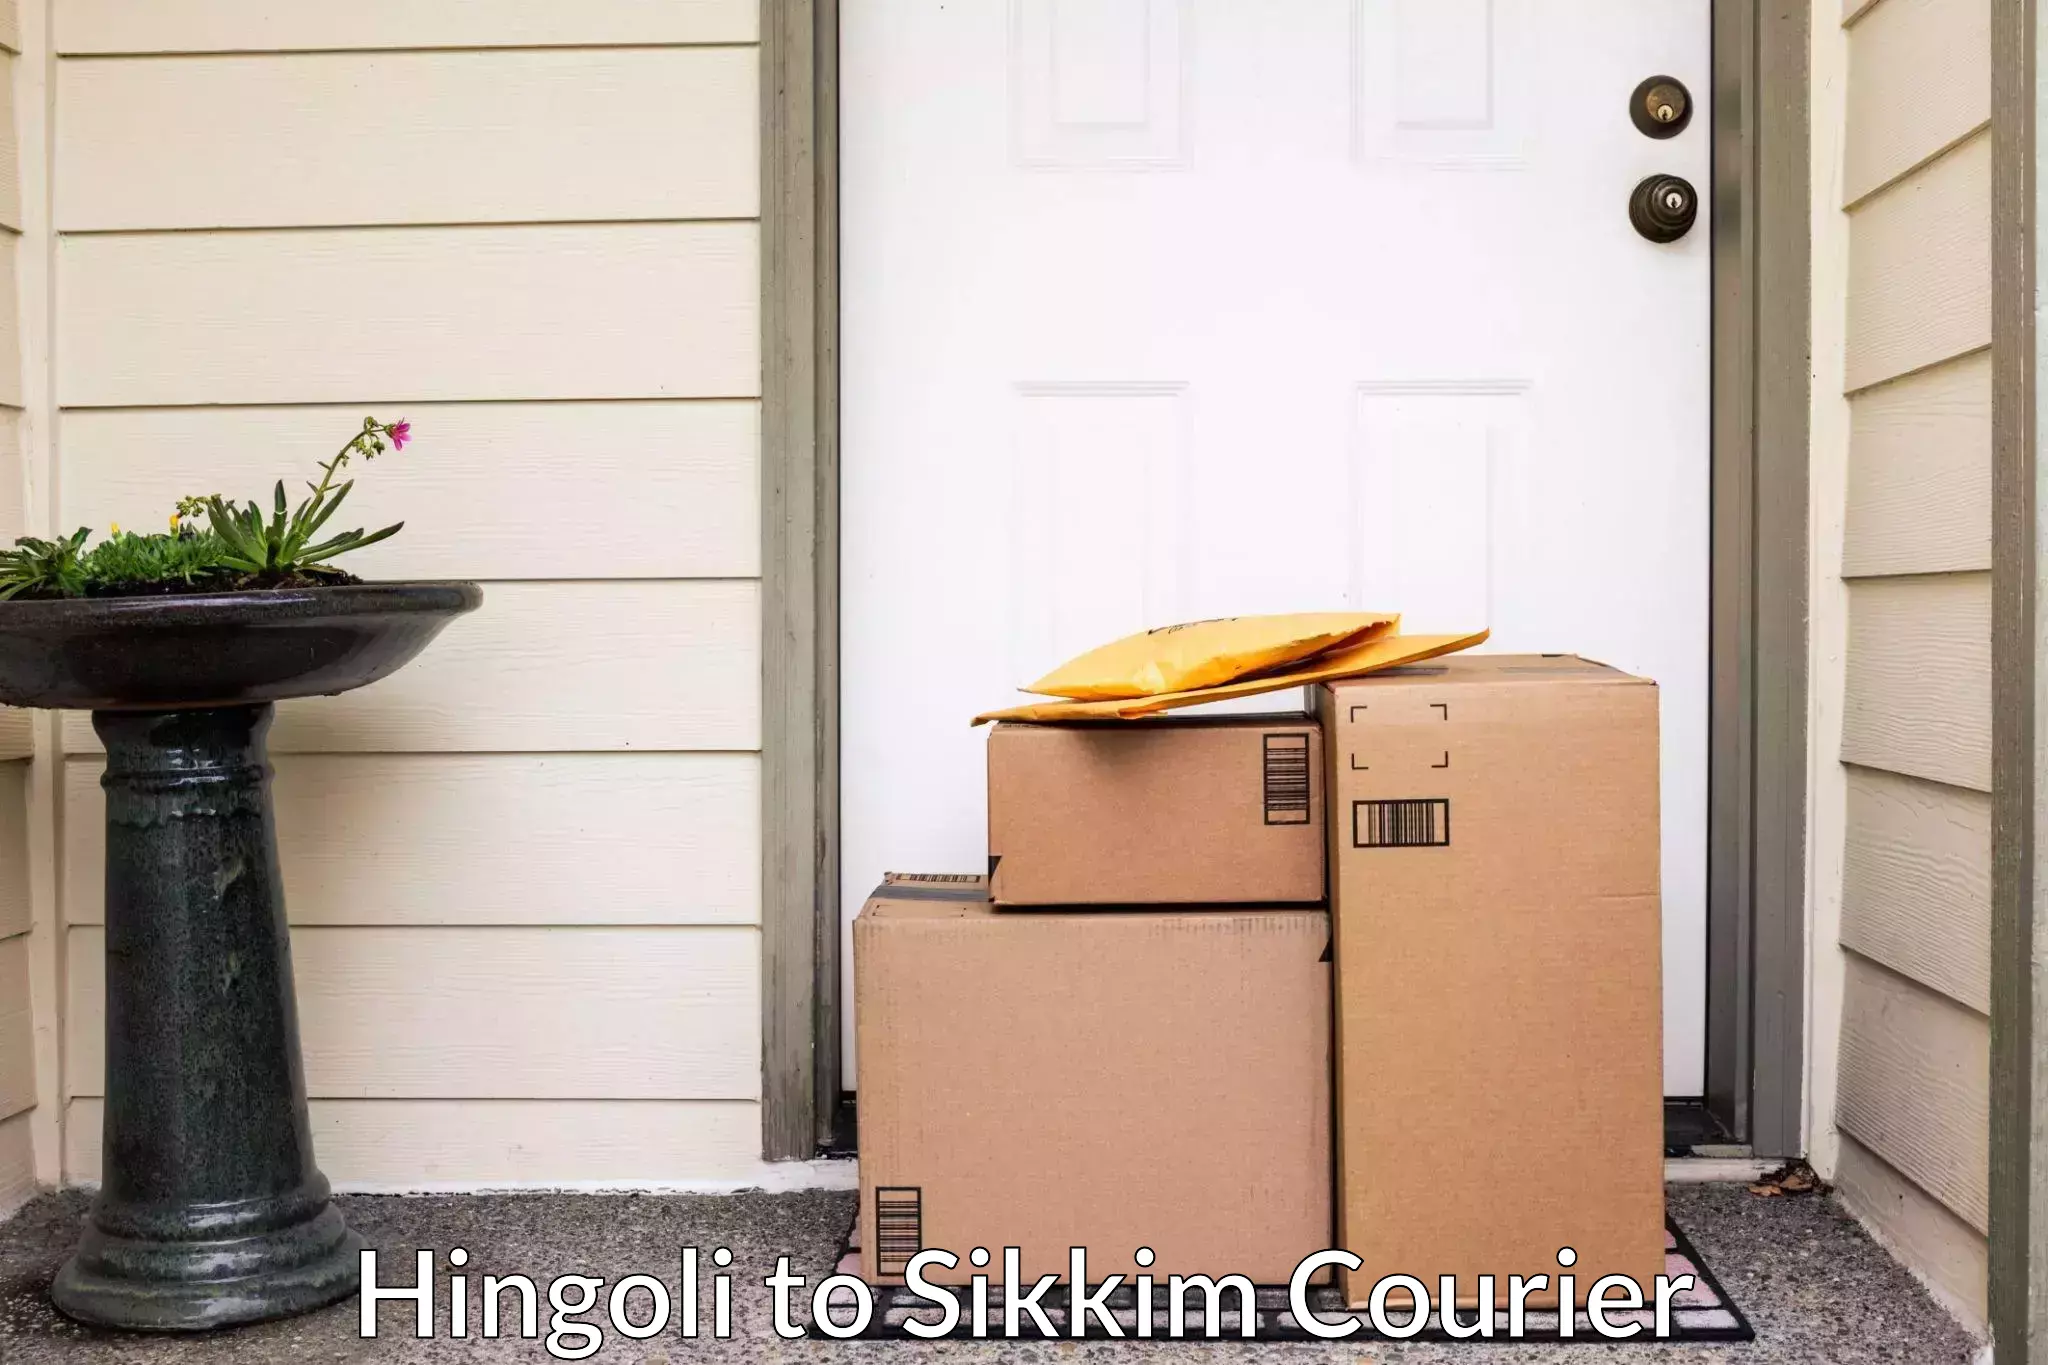 Furniture relocation experts Hingoli to Pelling